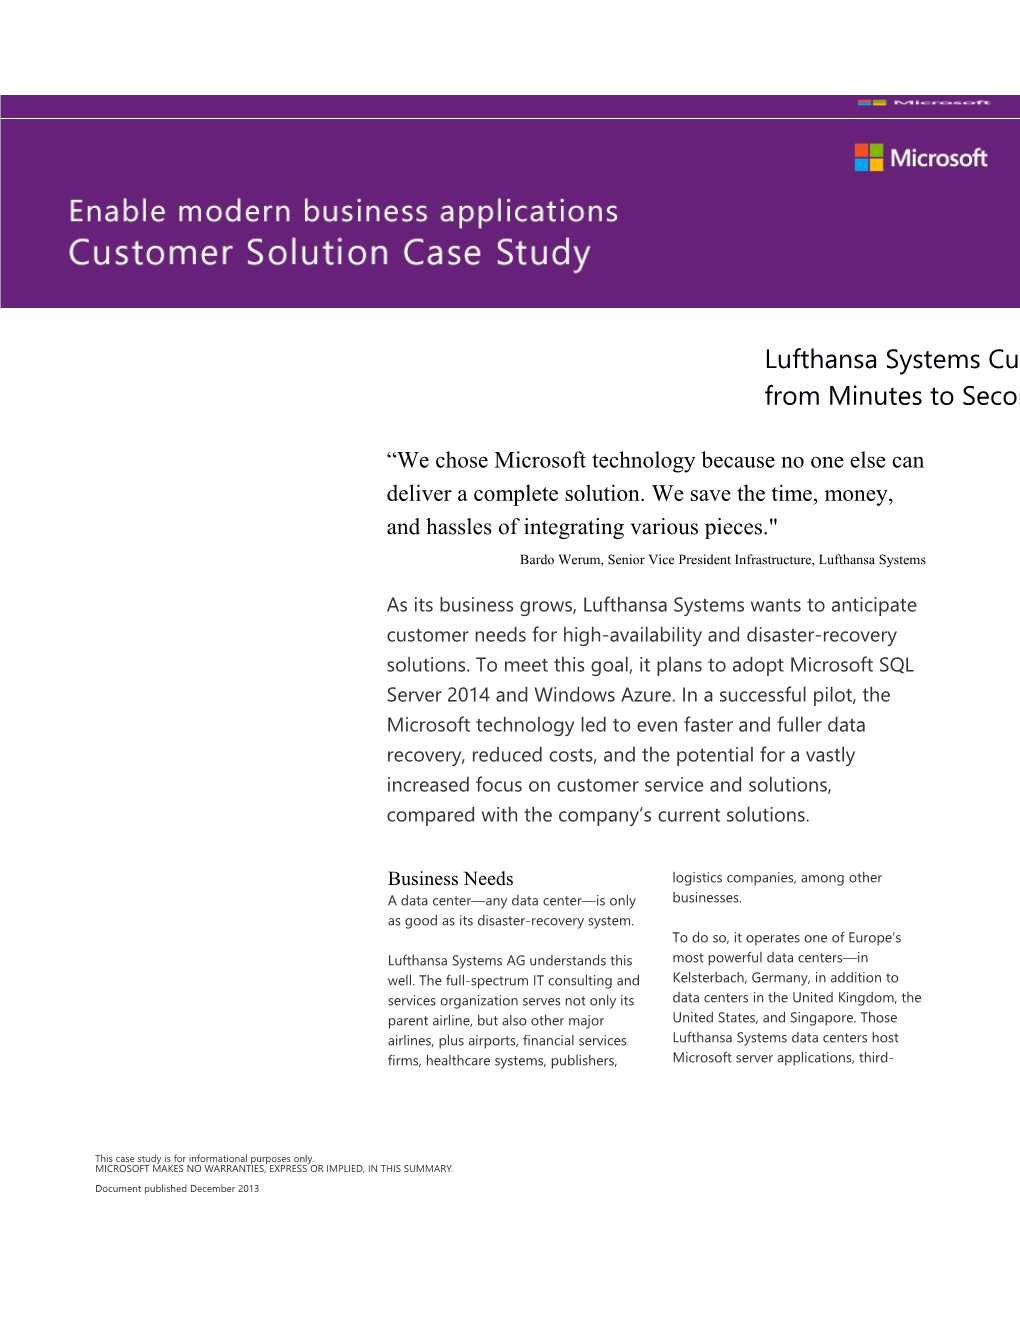 Lufthansa Systems Cuts Data Recovery Time from Minutes to Seconds with Cloud Solution